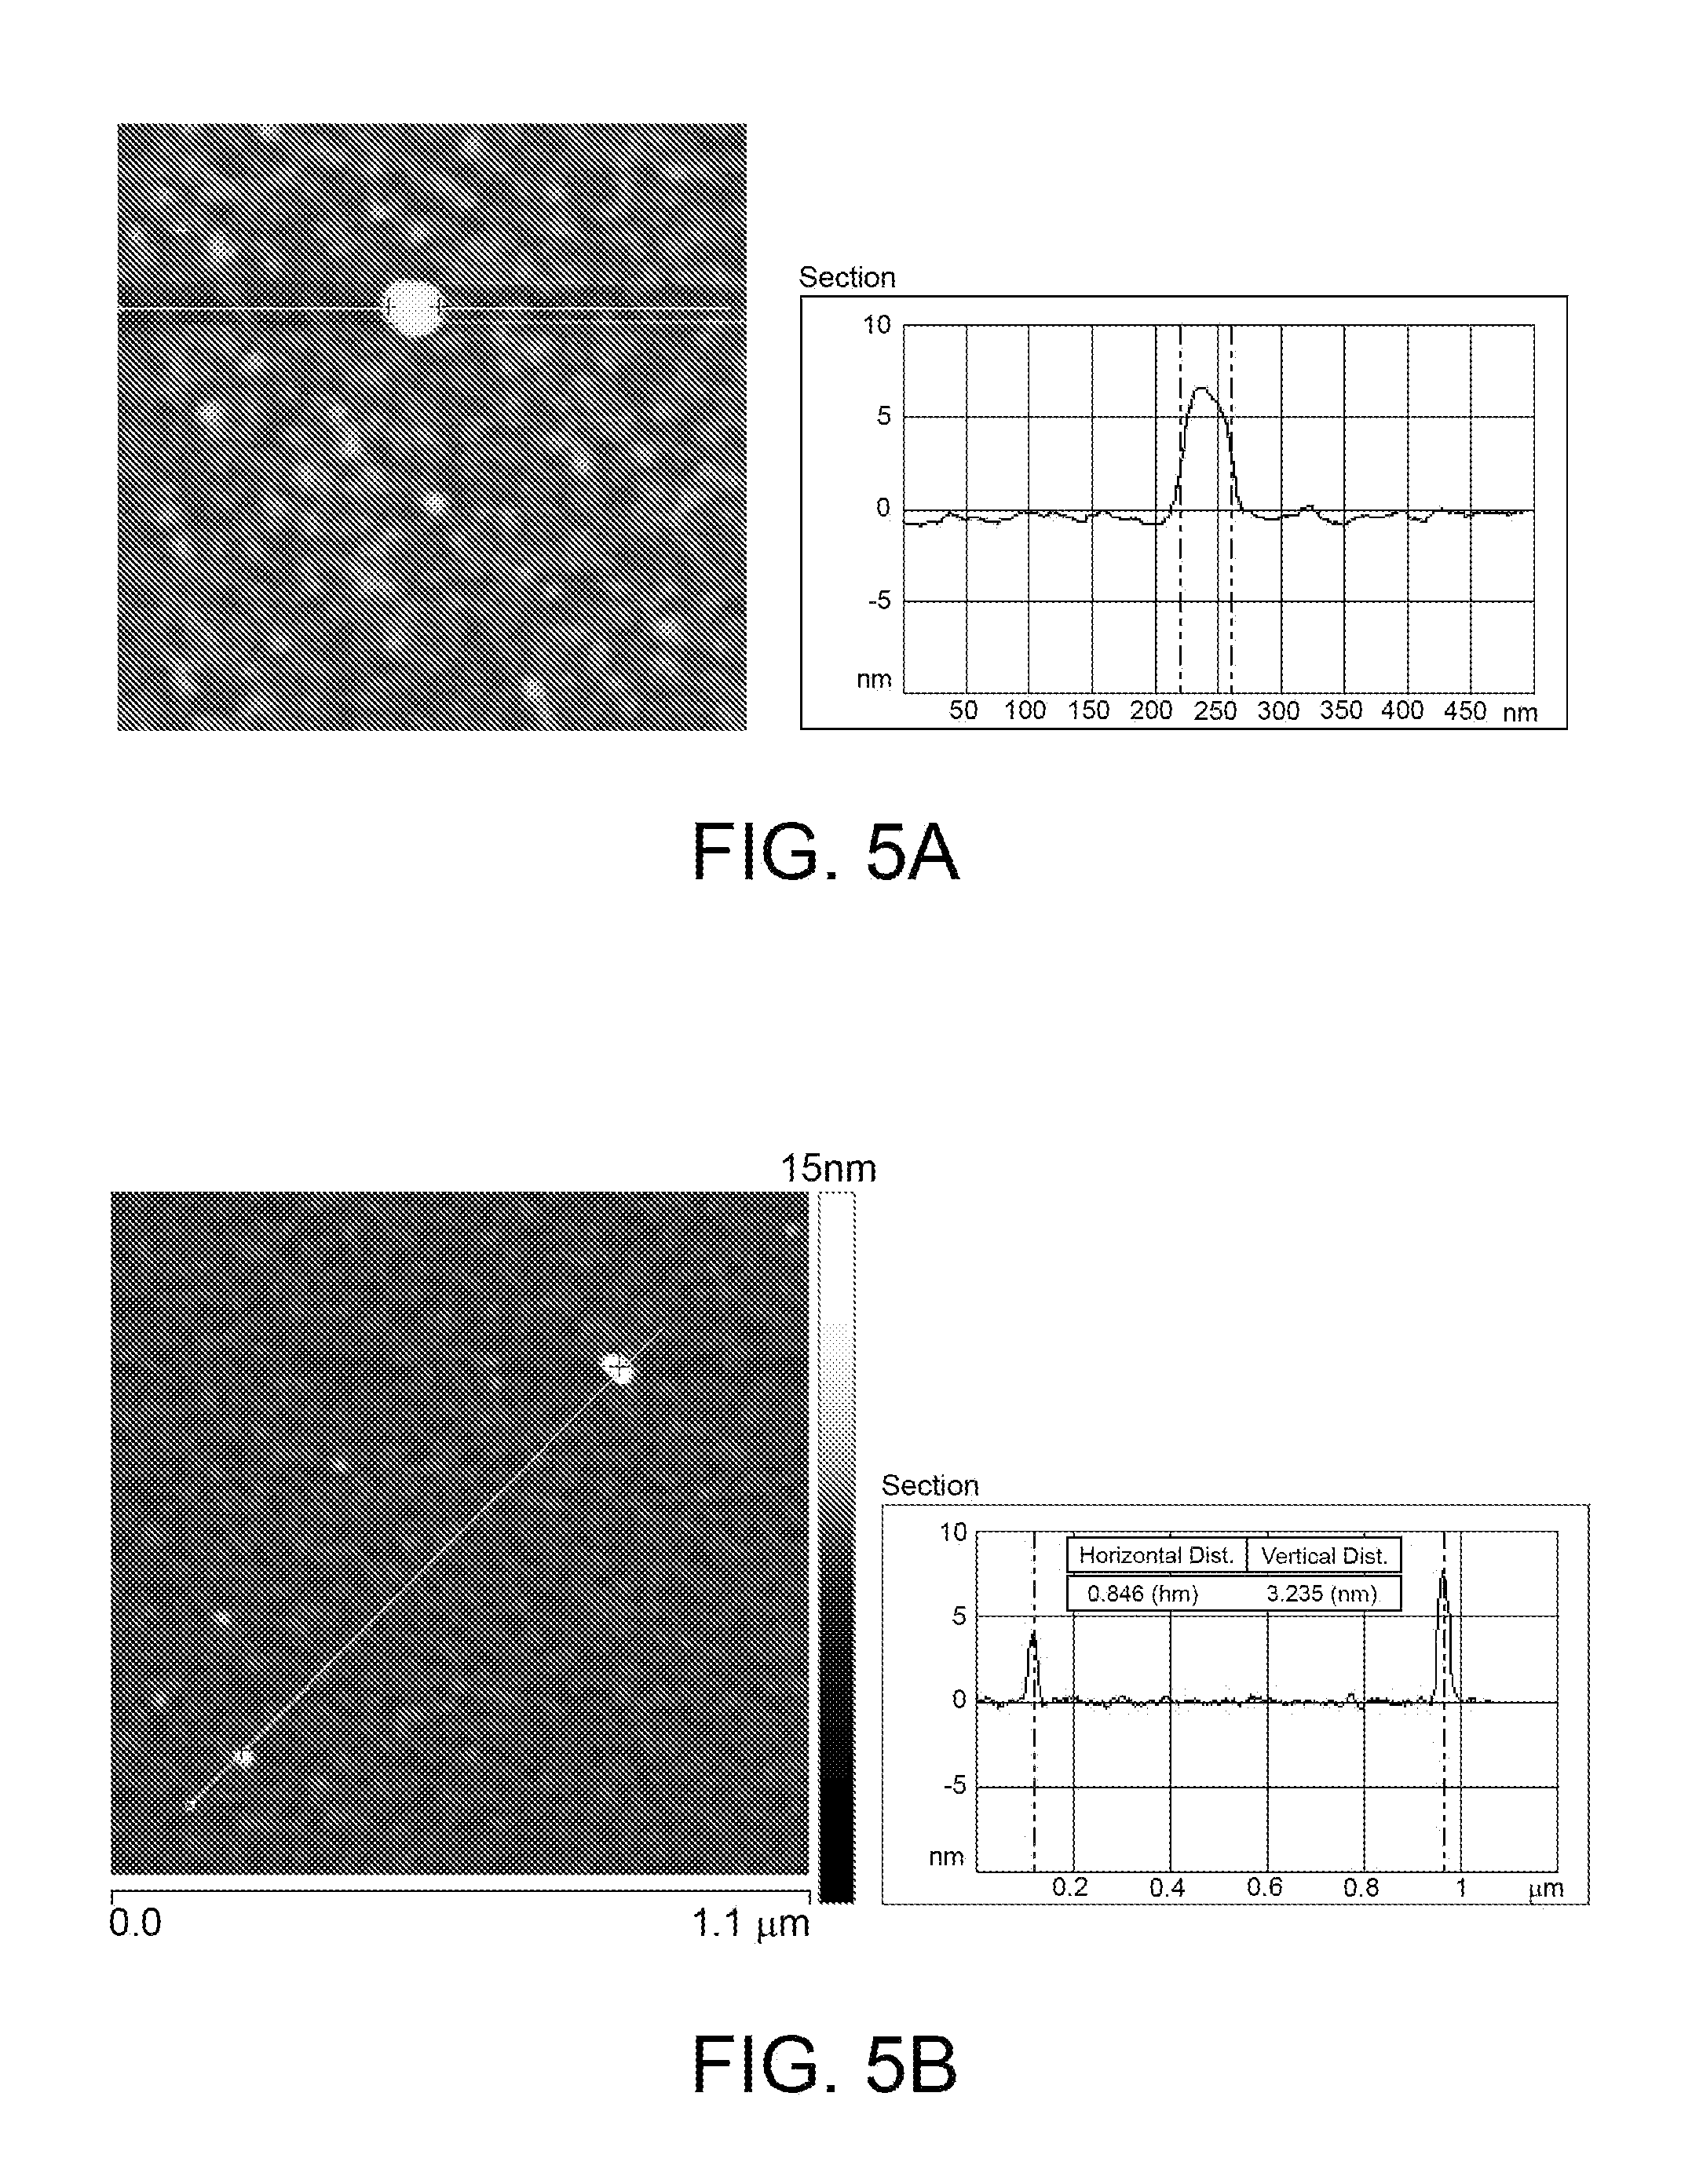 Planar support having an ultraflat surface and a device for detecting antigens comprising said planar support